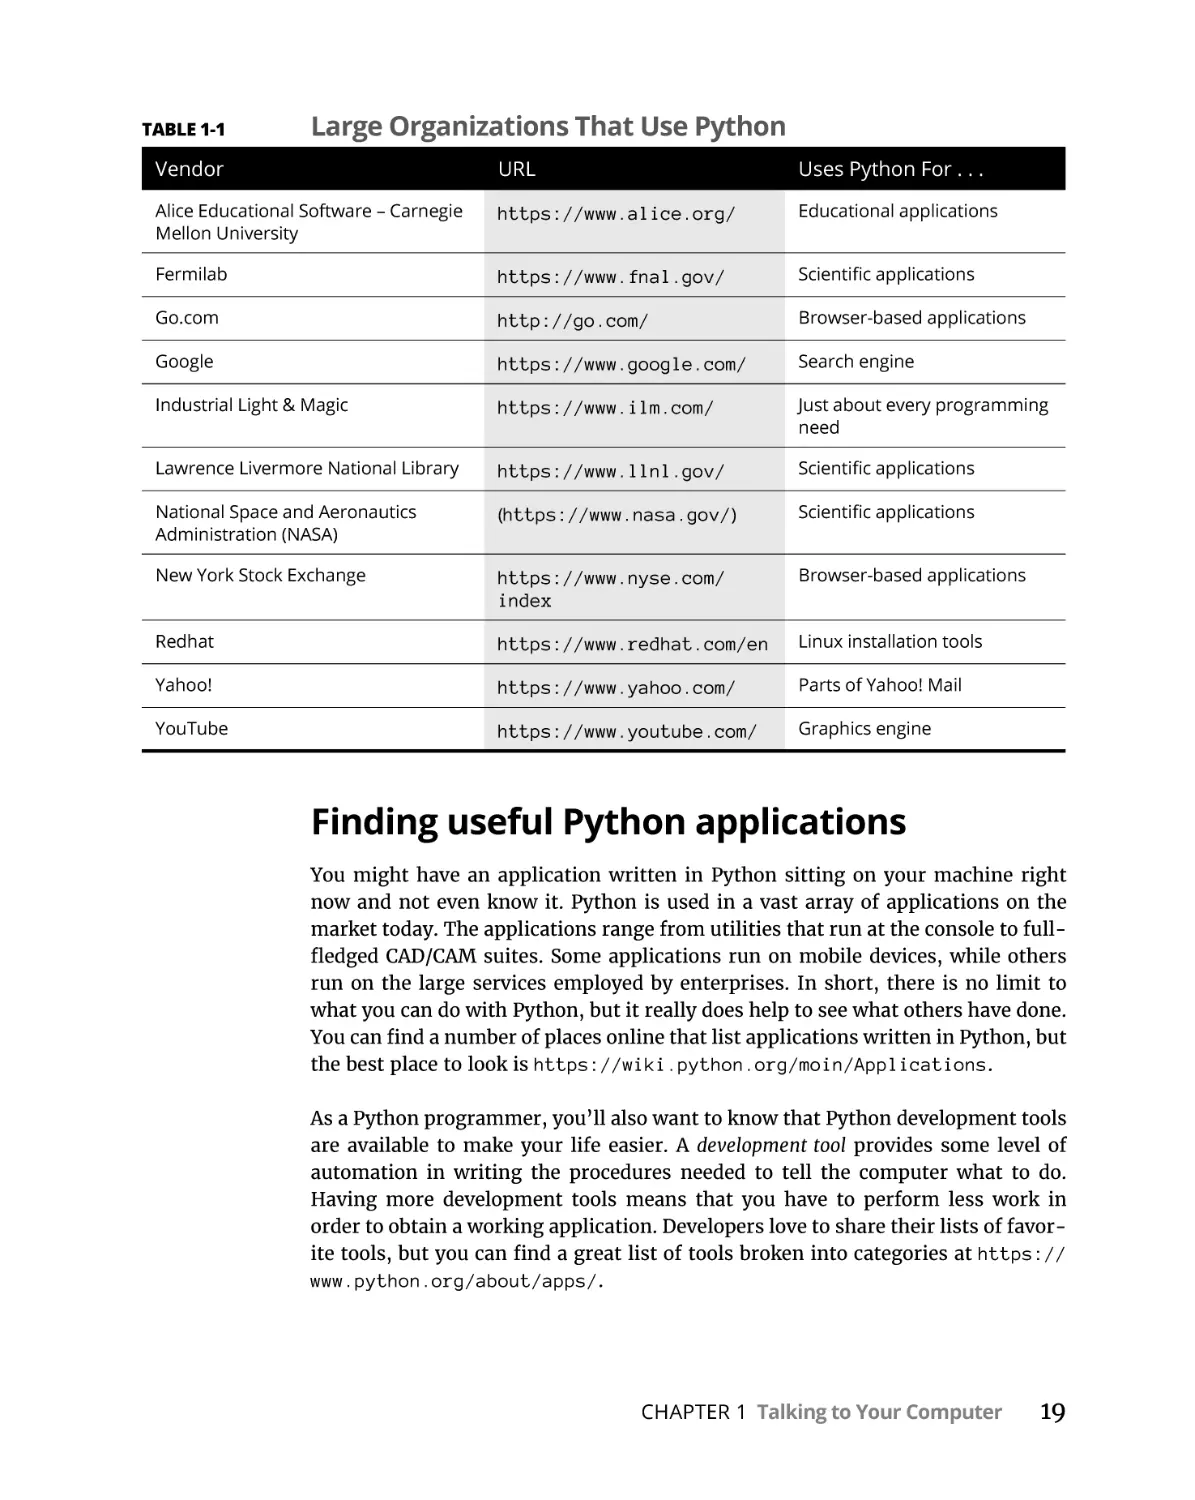 Finding useful Python applications